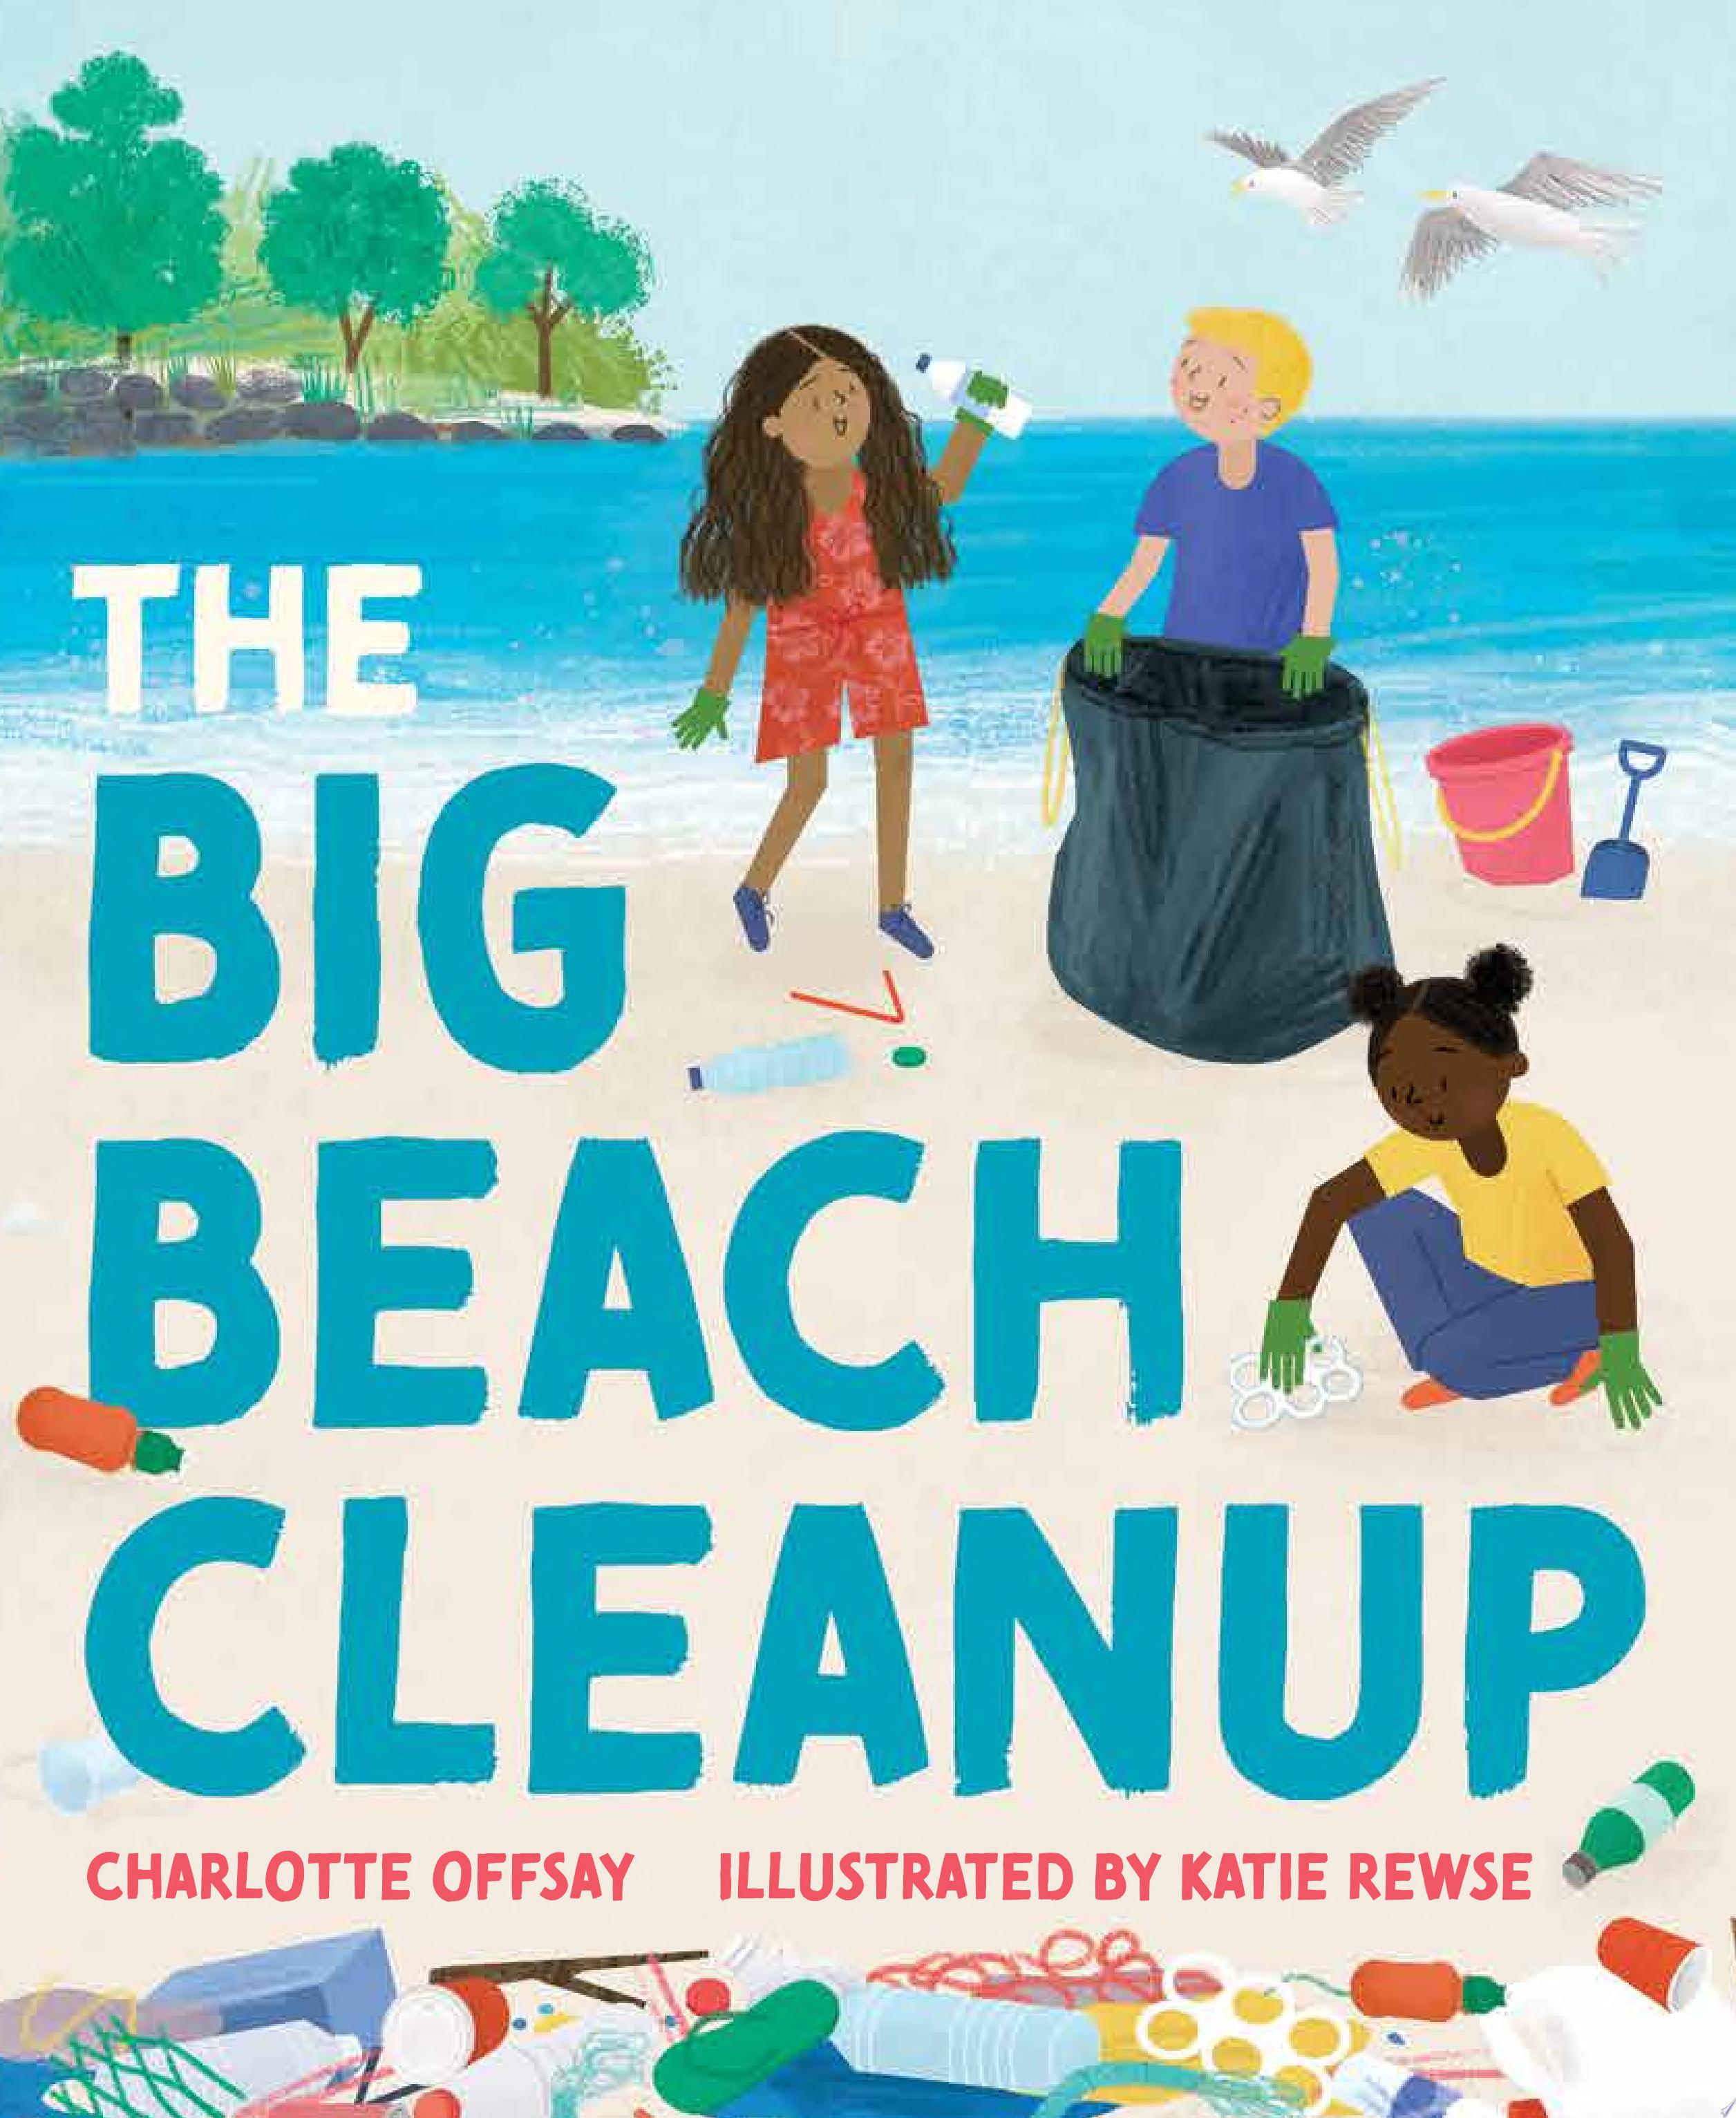 Image for "The Big Beach Cleanup"